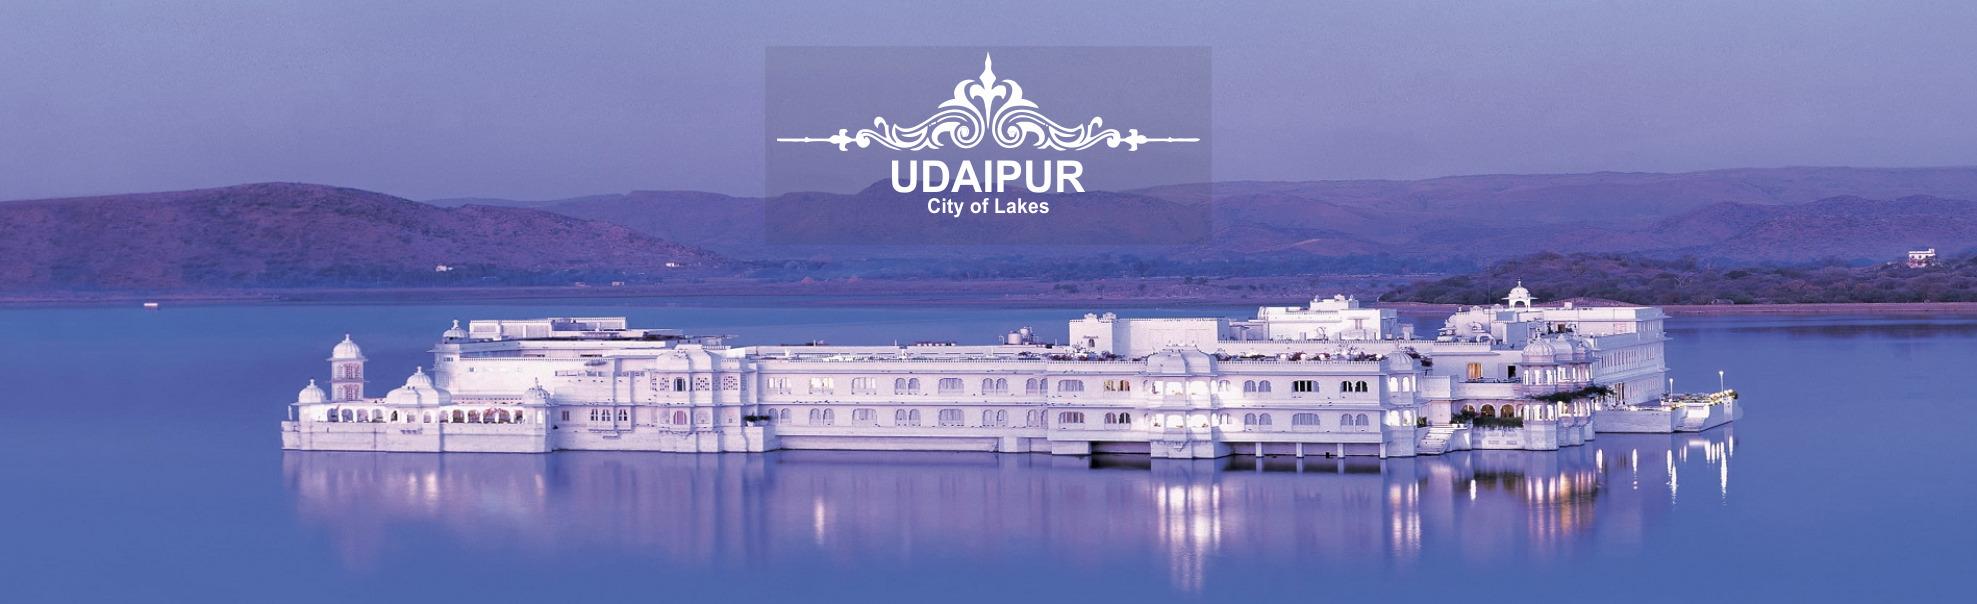 Udaipur City of Lakes